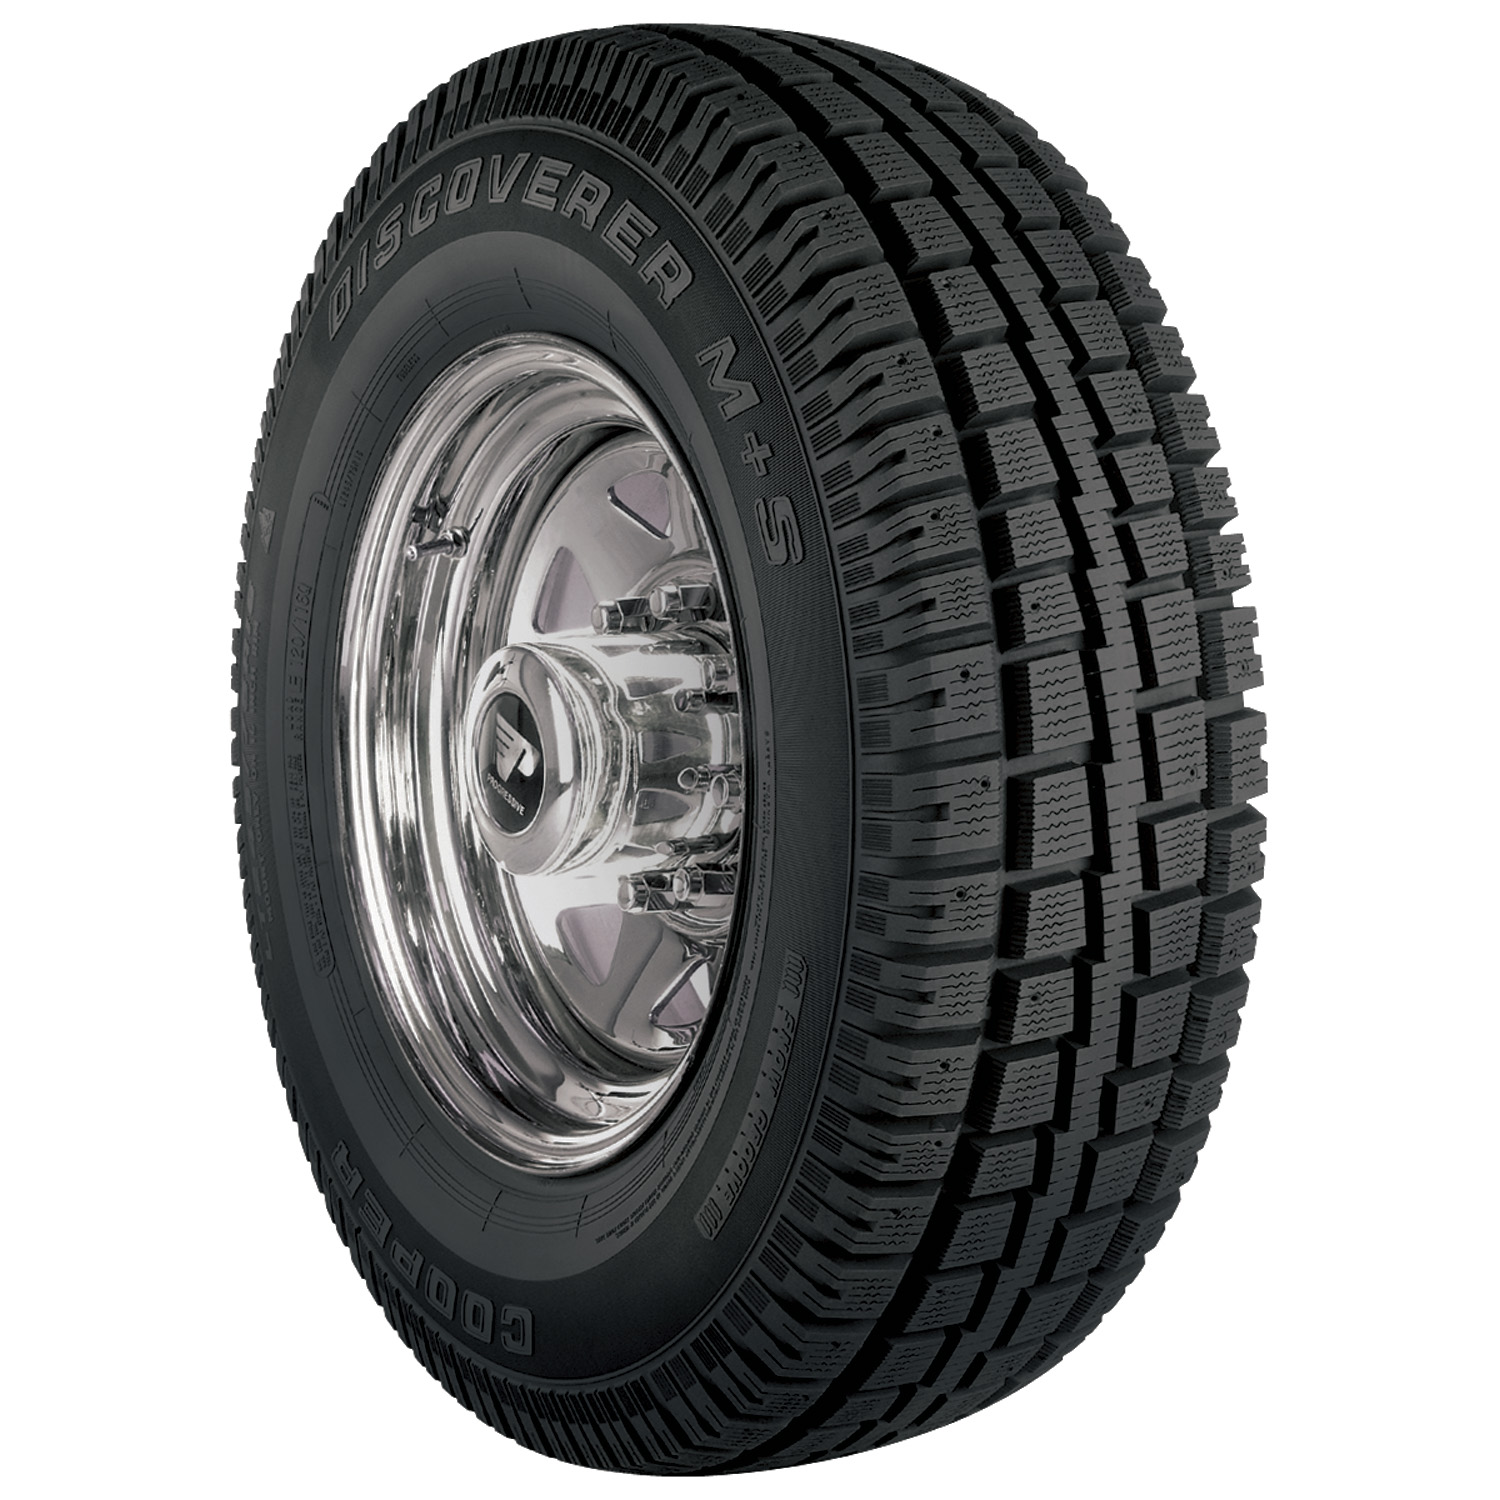 0029142621805 - DISCOVERER M+S - 245/70R17 110S BW - WINTER TIRE